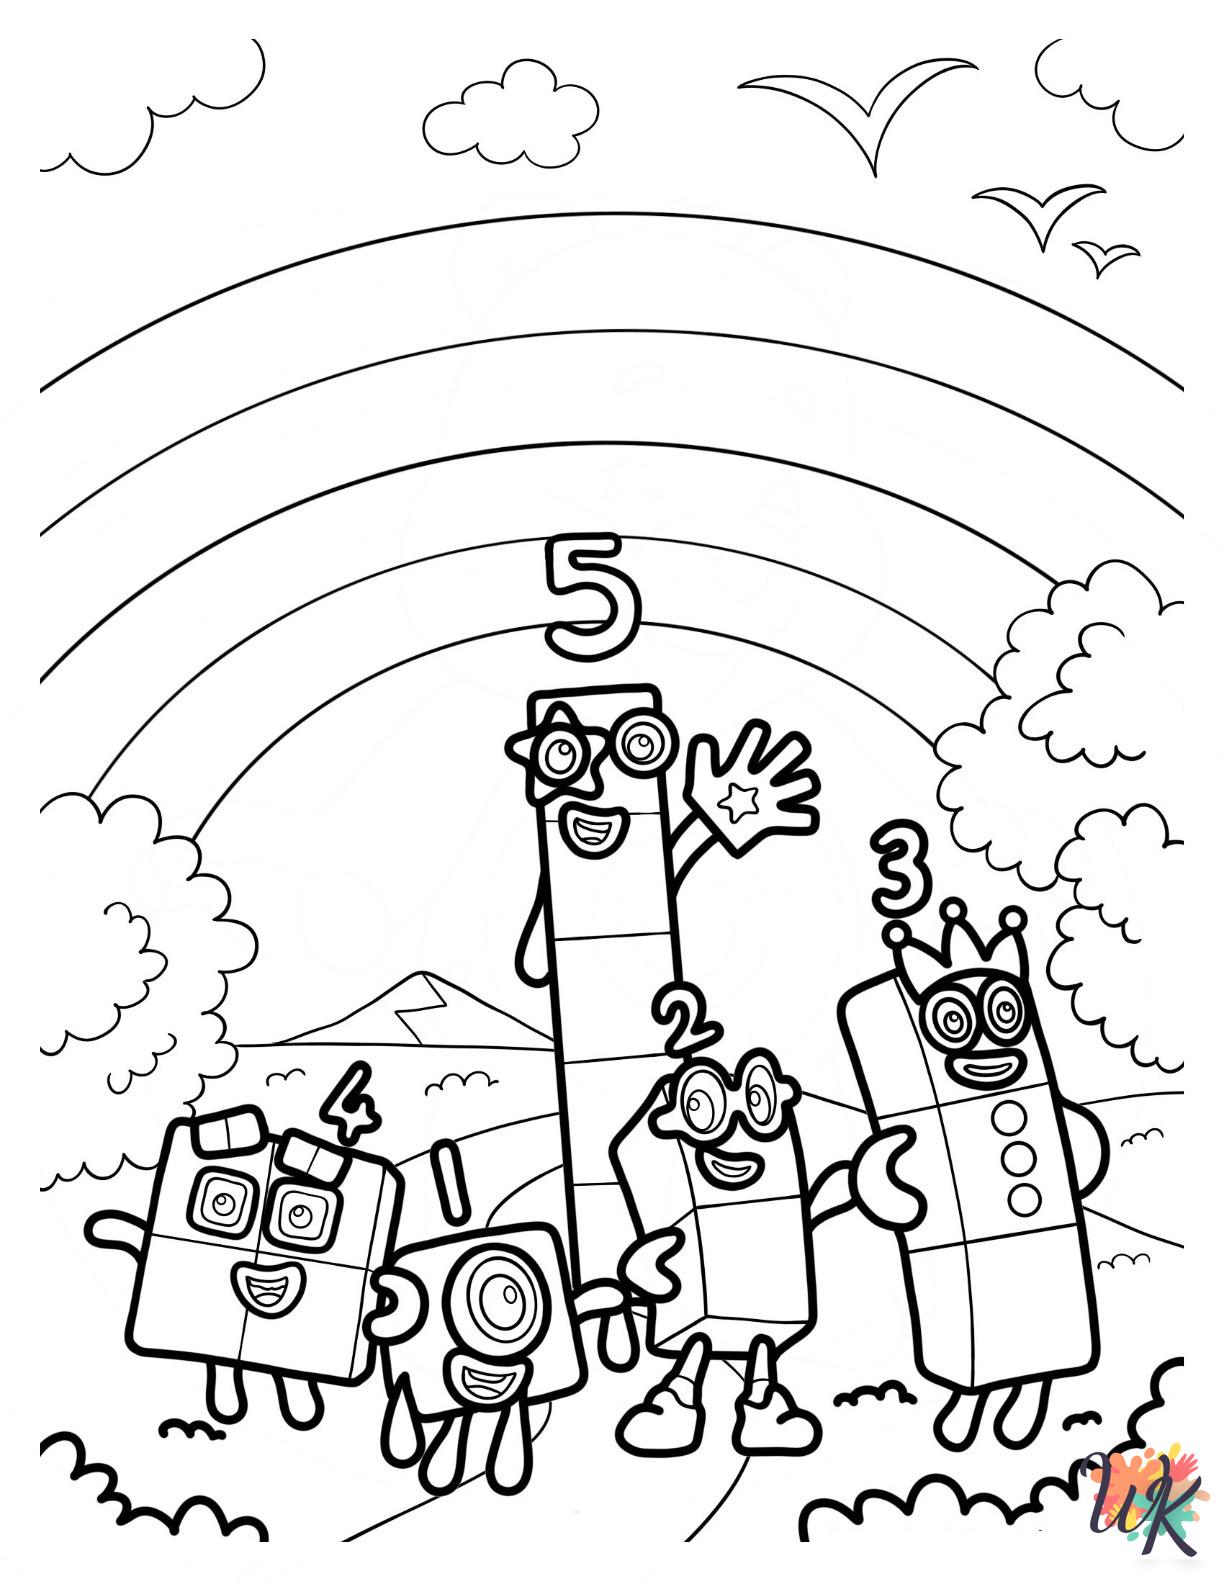 Numberblocks themed coloring pages